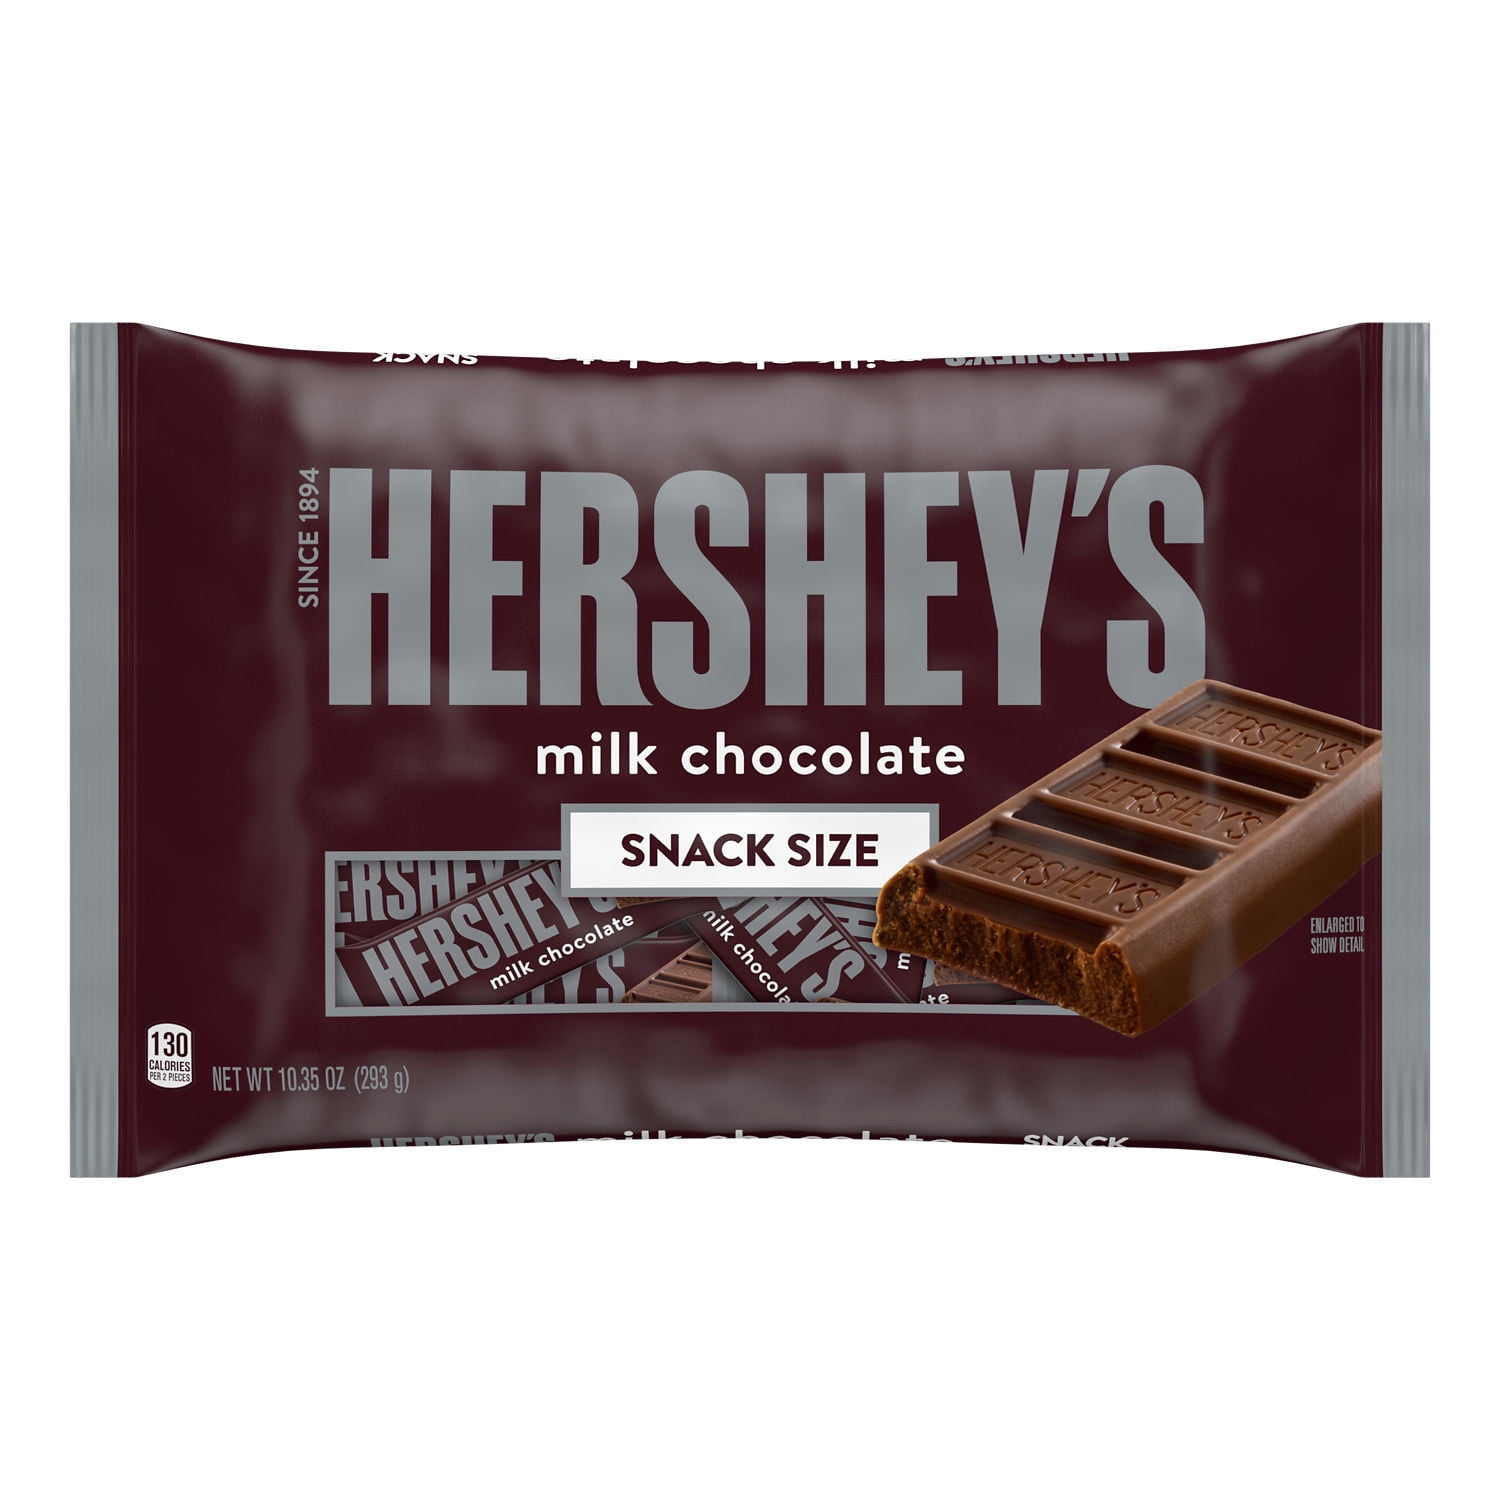 Hershey's Milk Chocolate Snack Size, Easter Candy Bars Bag, 10.35 oz